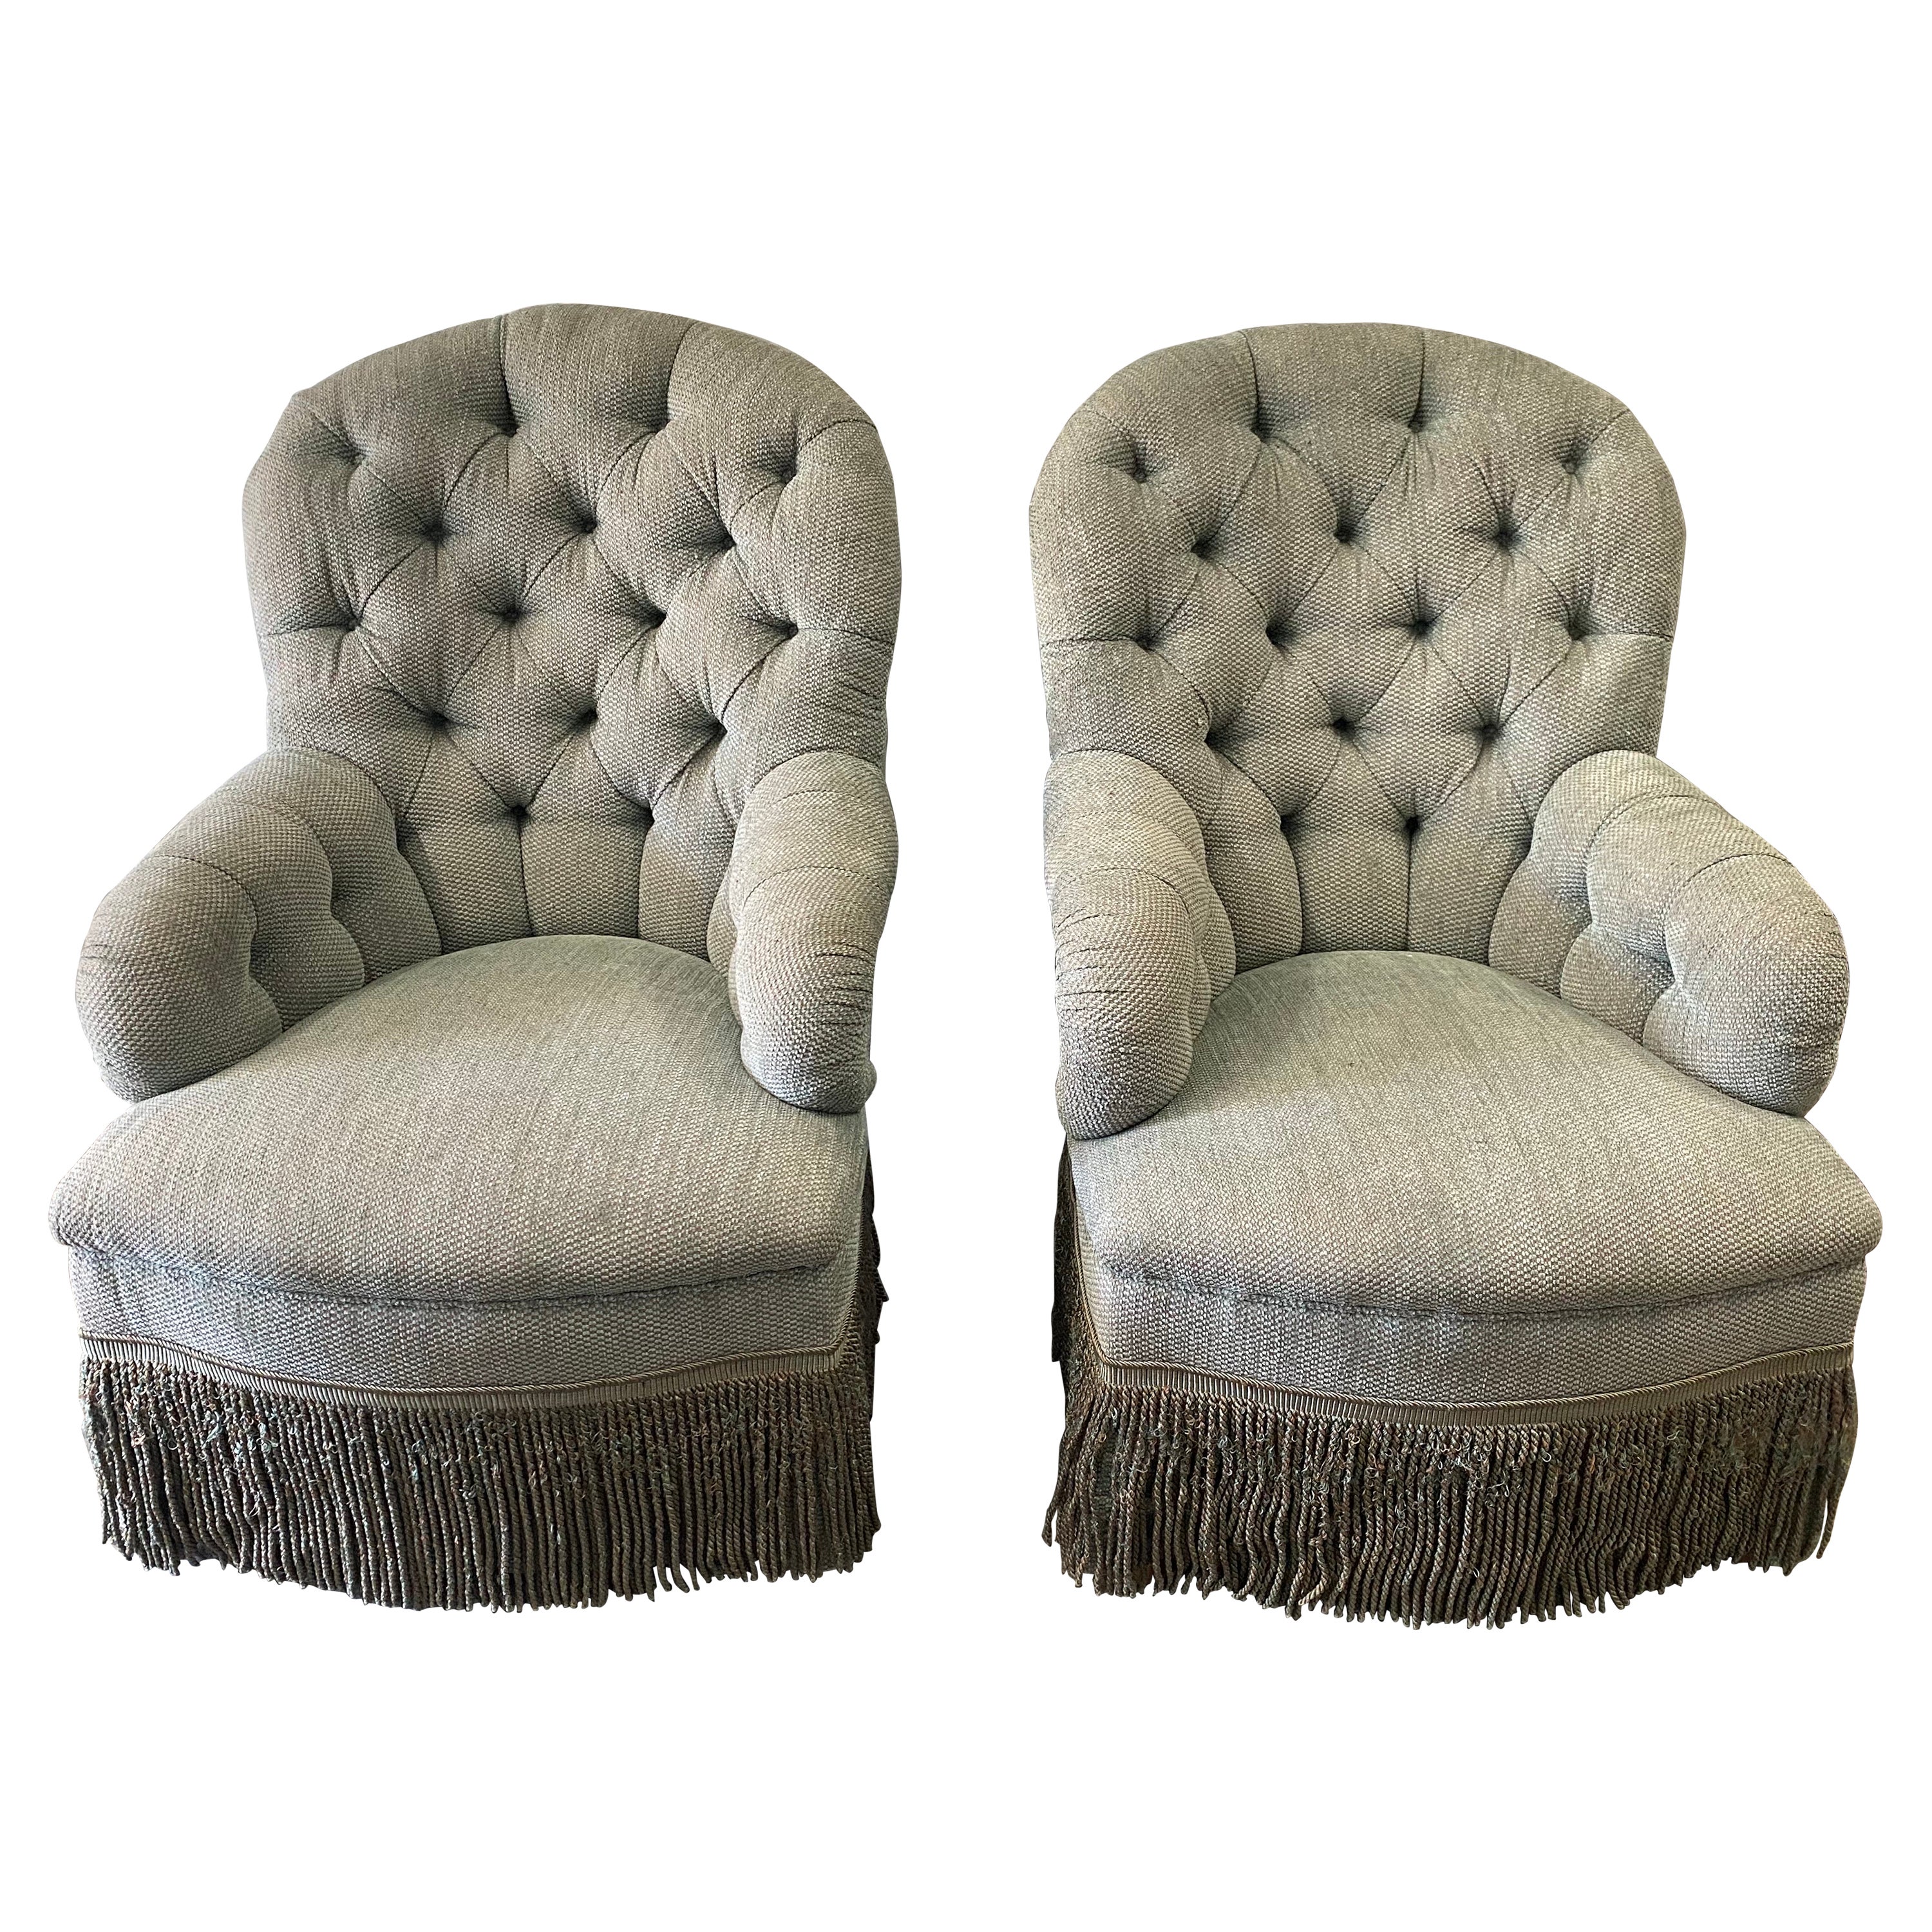 Pair of Tufted Rounded Back Armchairs Custom-Made by David Easton For Sale